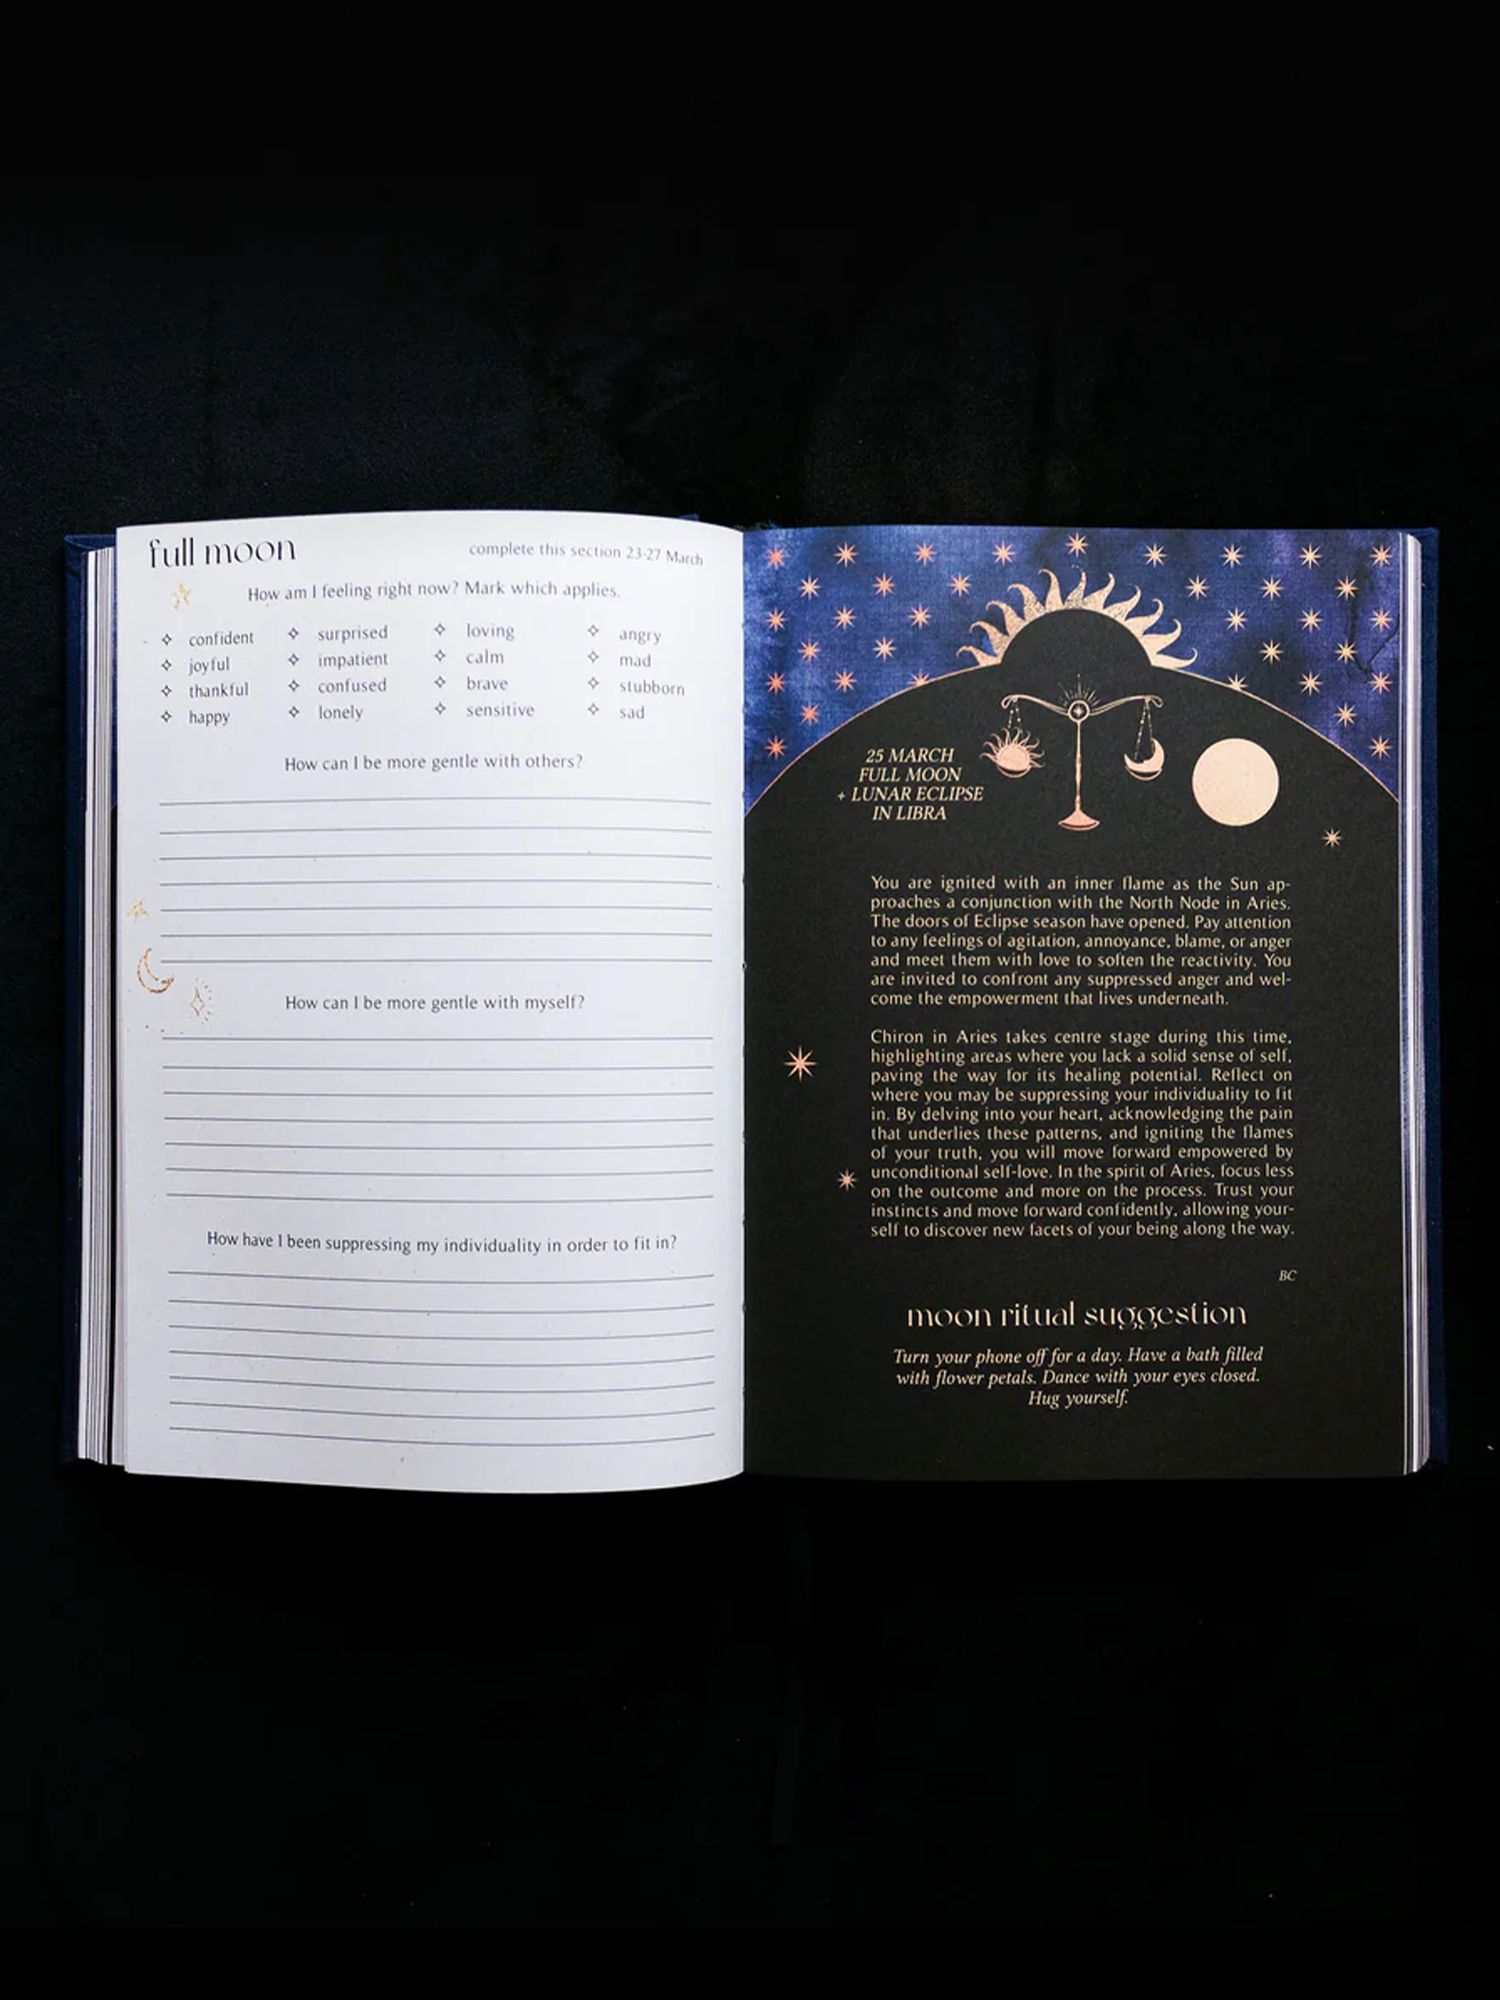 2024 year of growth book | dreamy moons